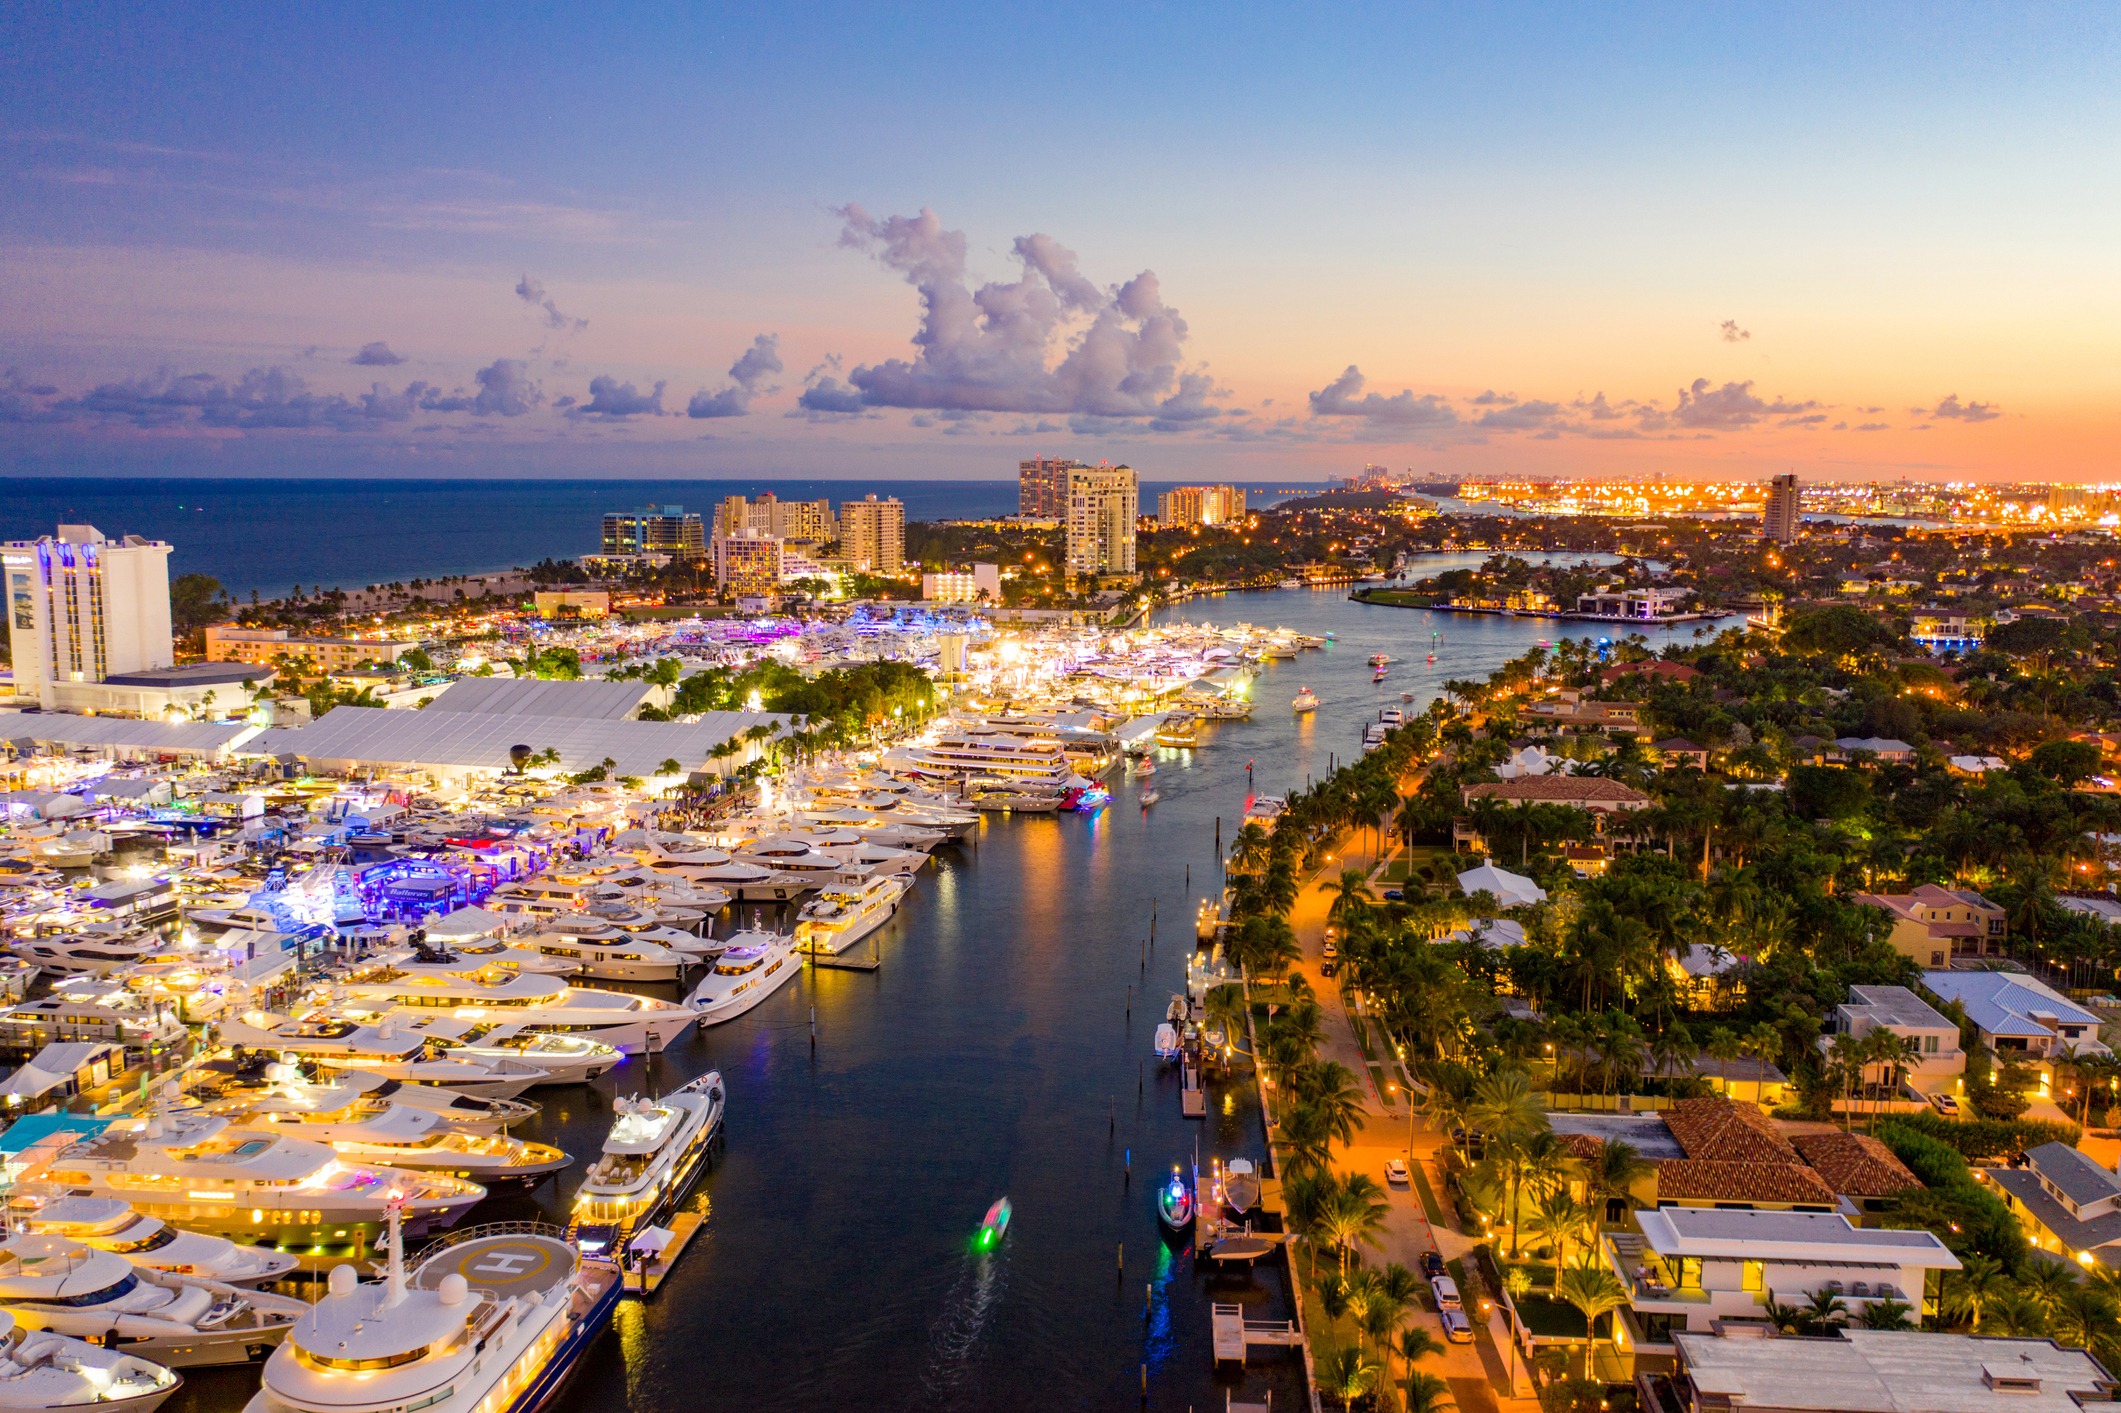 An overhead shot of Ford Lauderdale, Florida at dusk. Yachts are docked along a canal across from homes and palm trees.